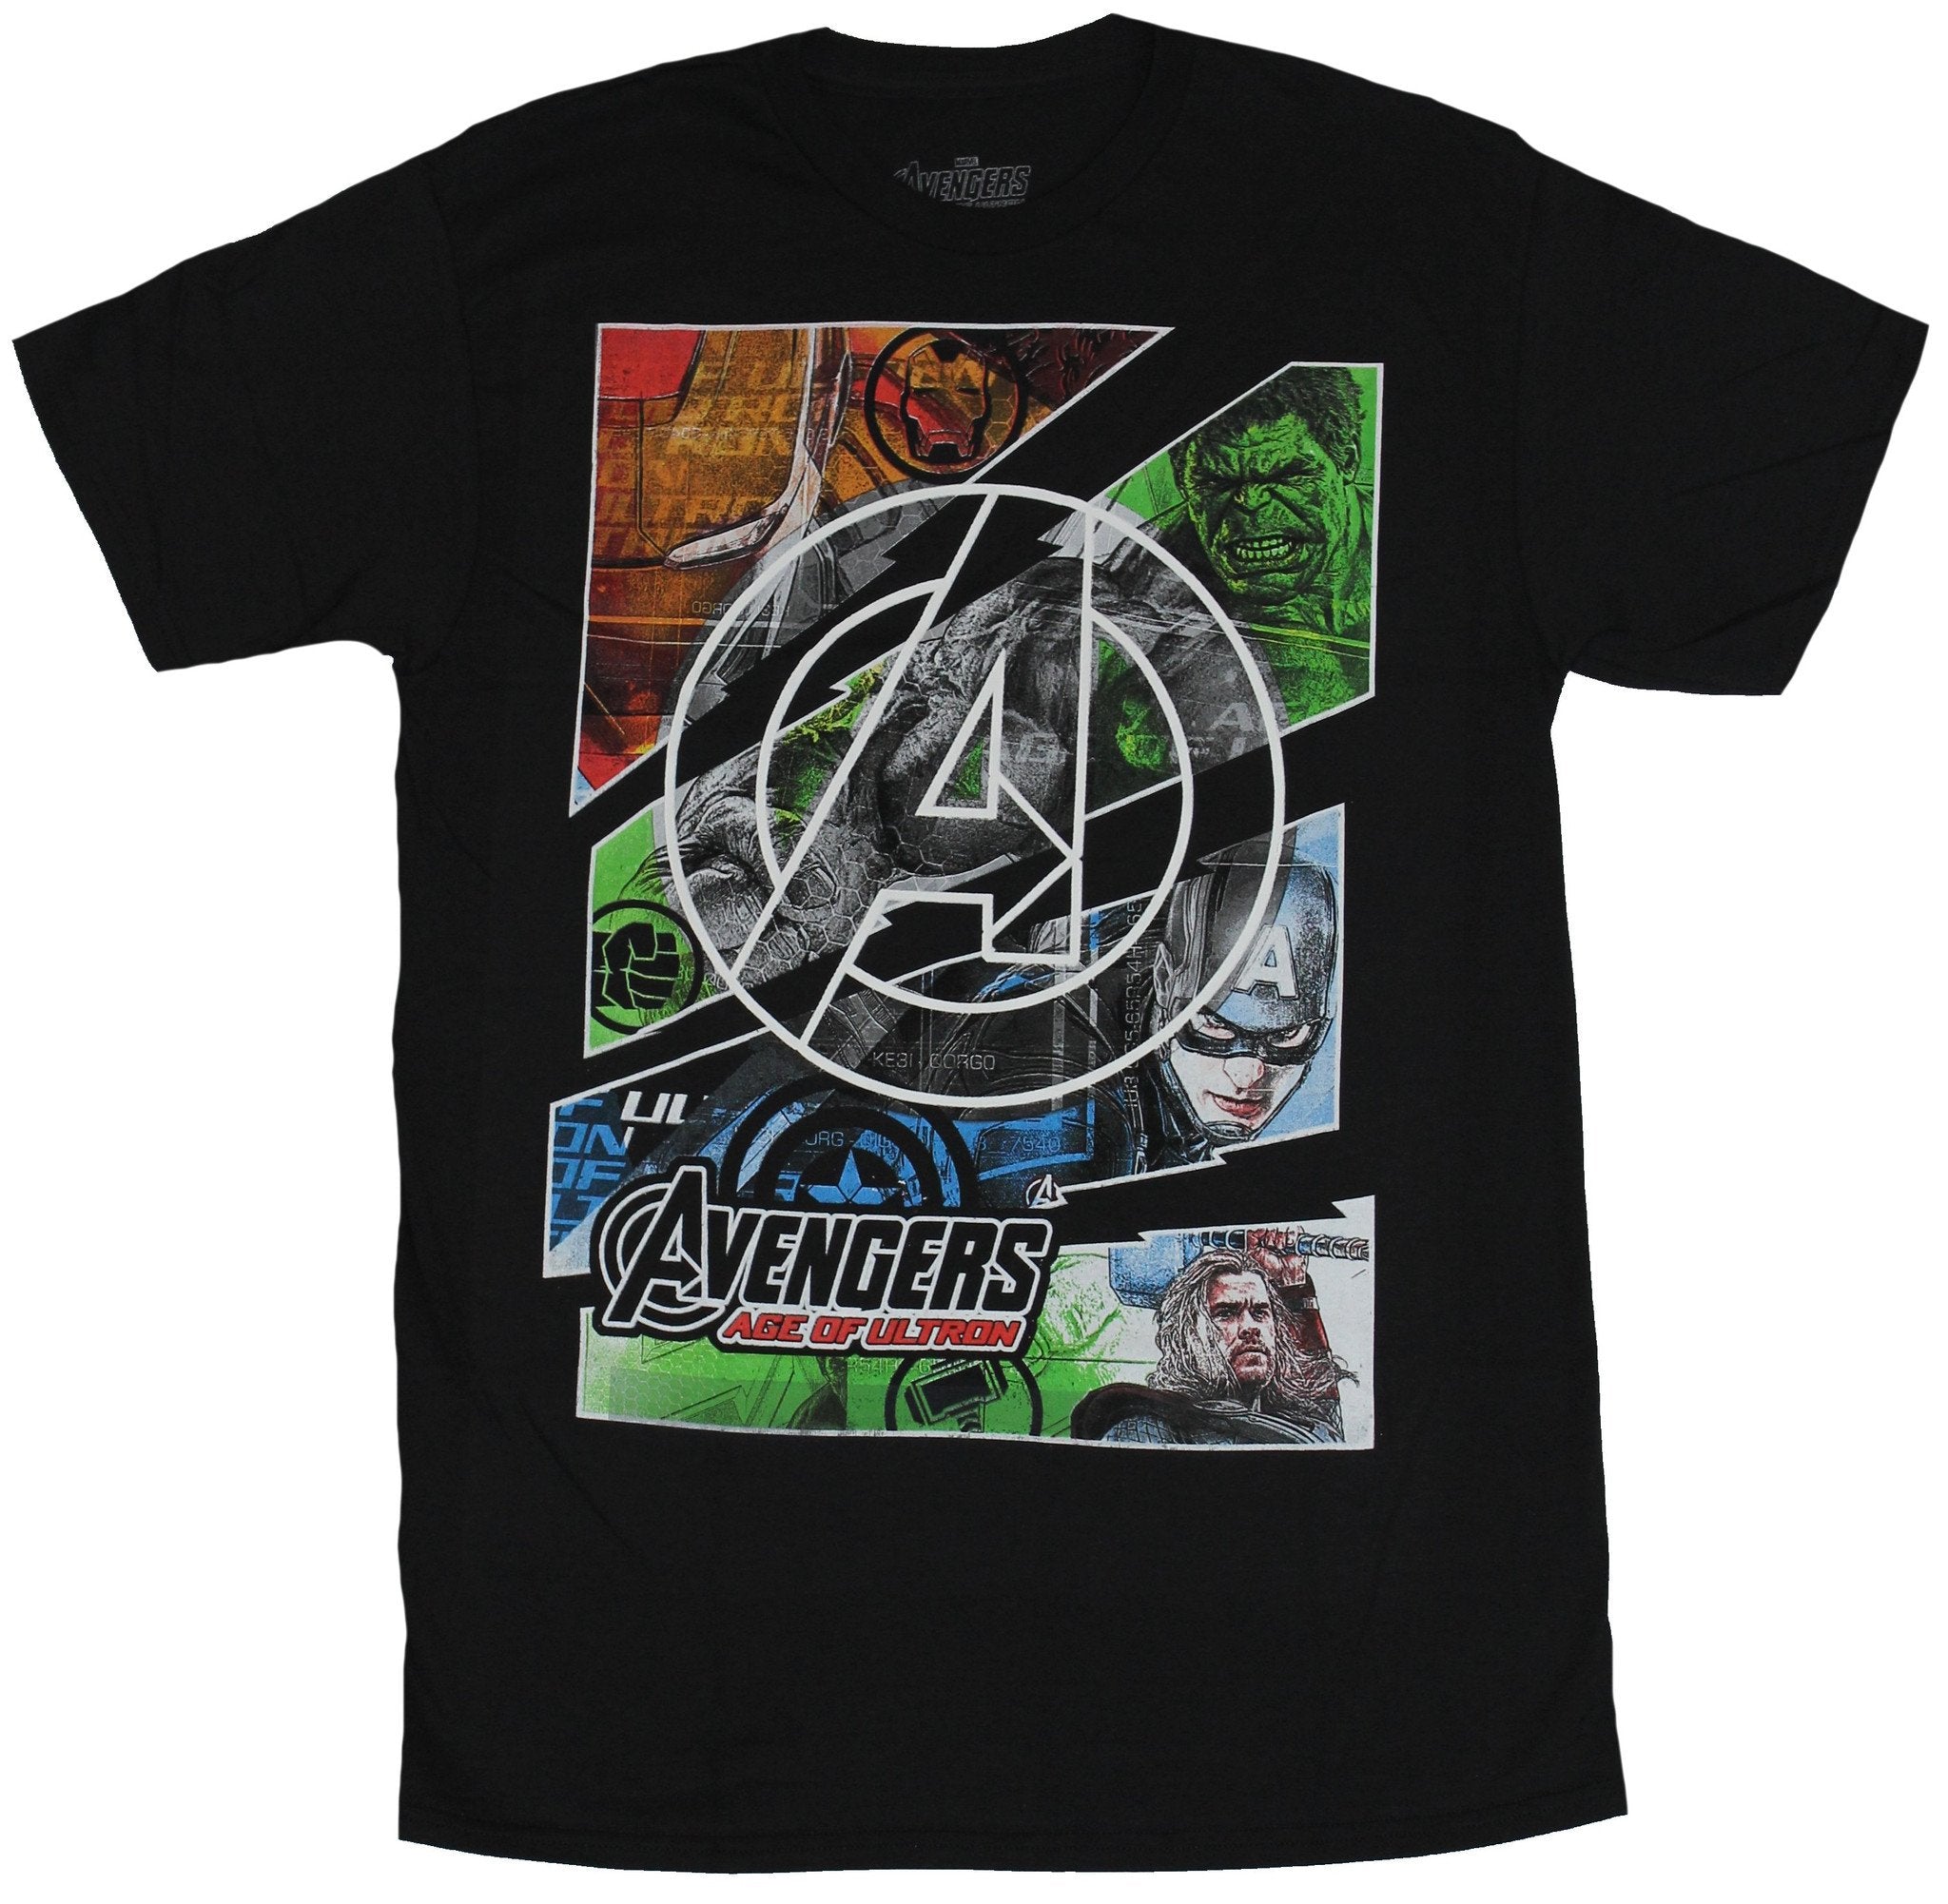 The Avengers (Marvel Comics) Mens T-Shirt - Age of Ultron Boxed Under Logo